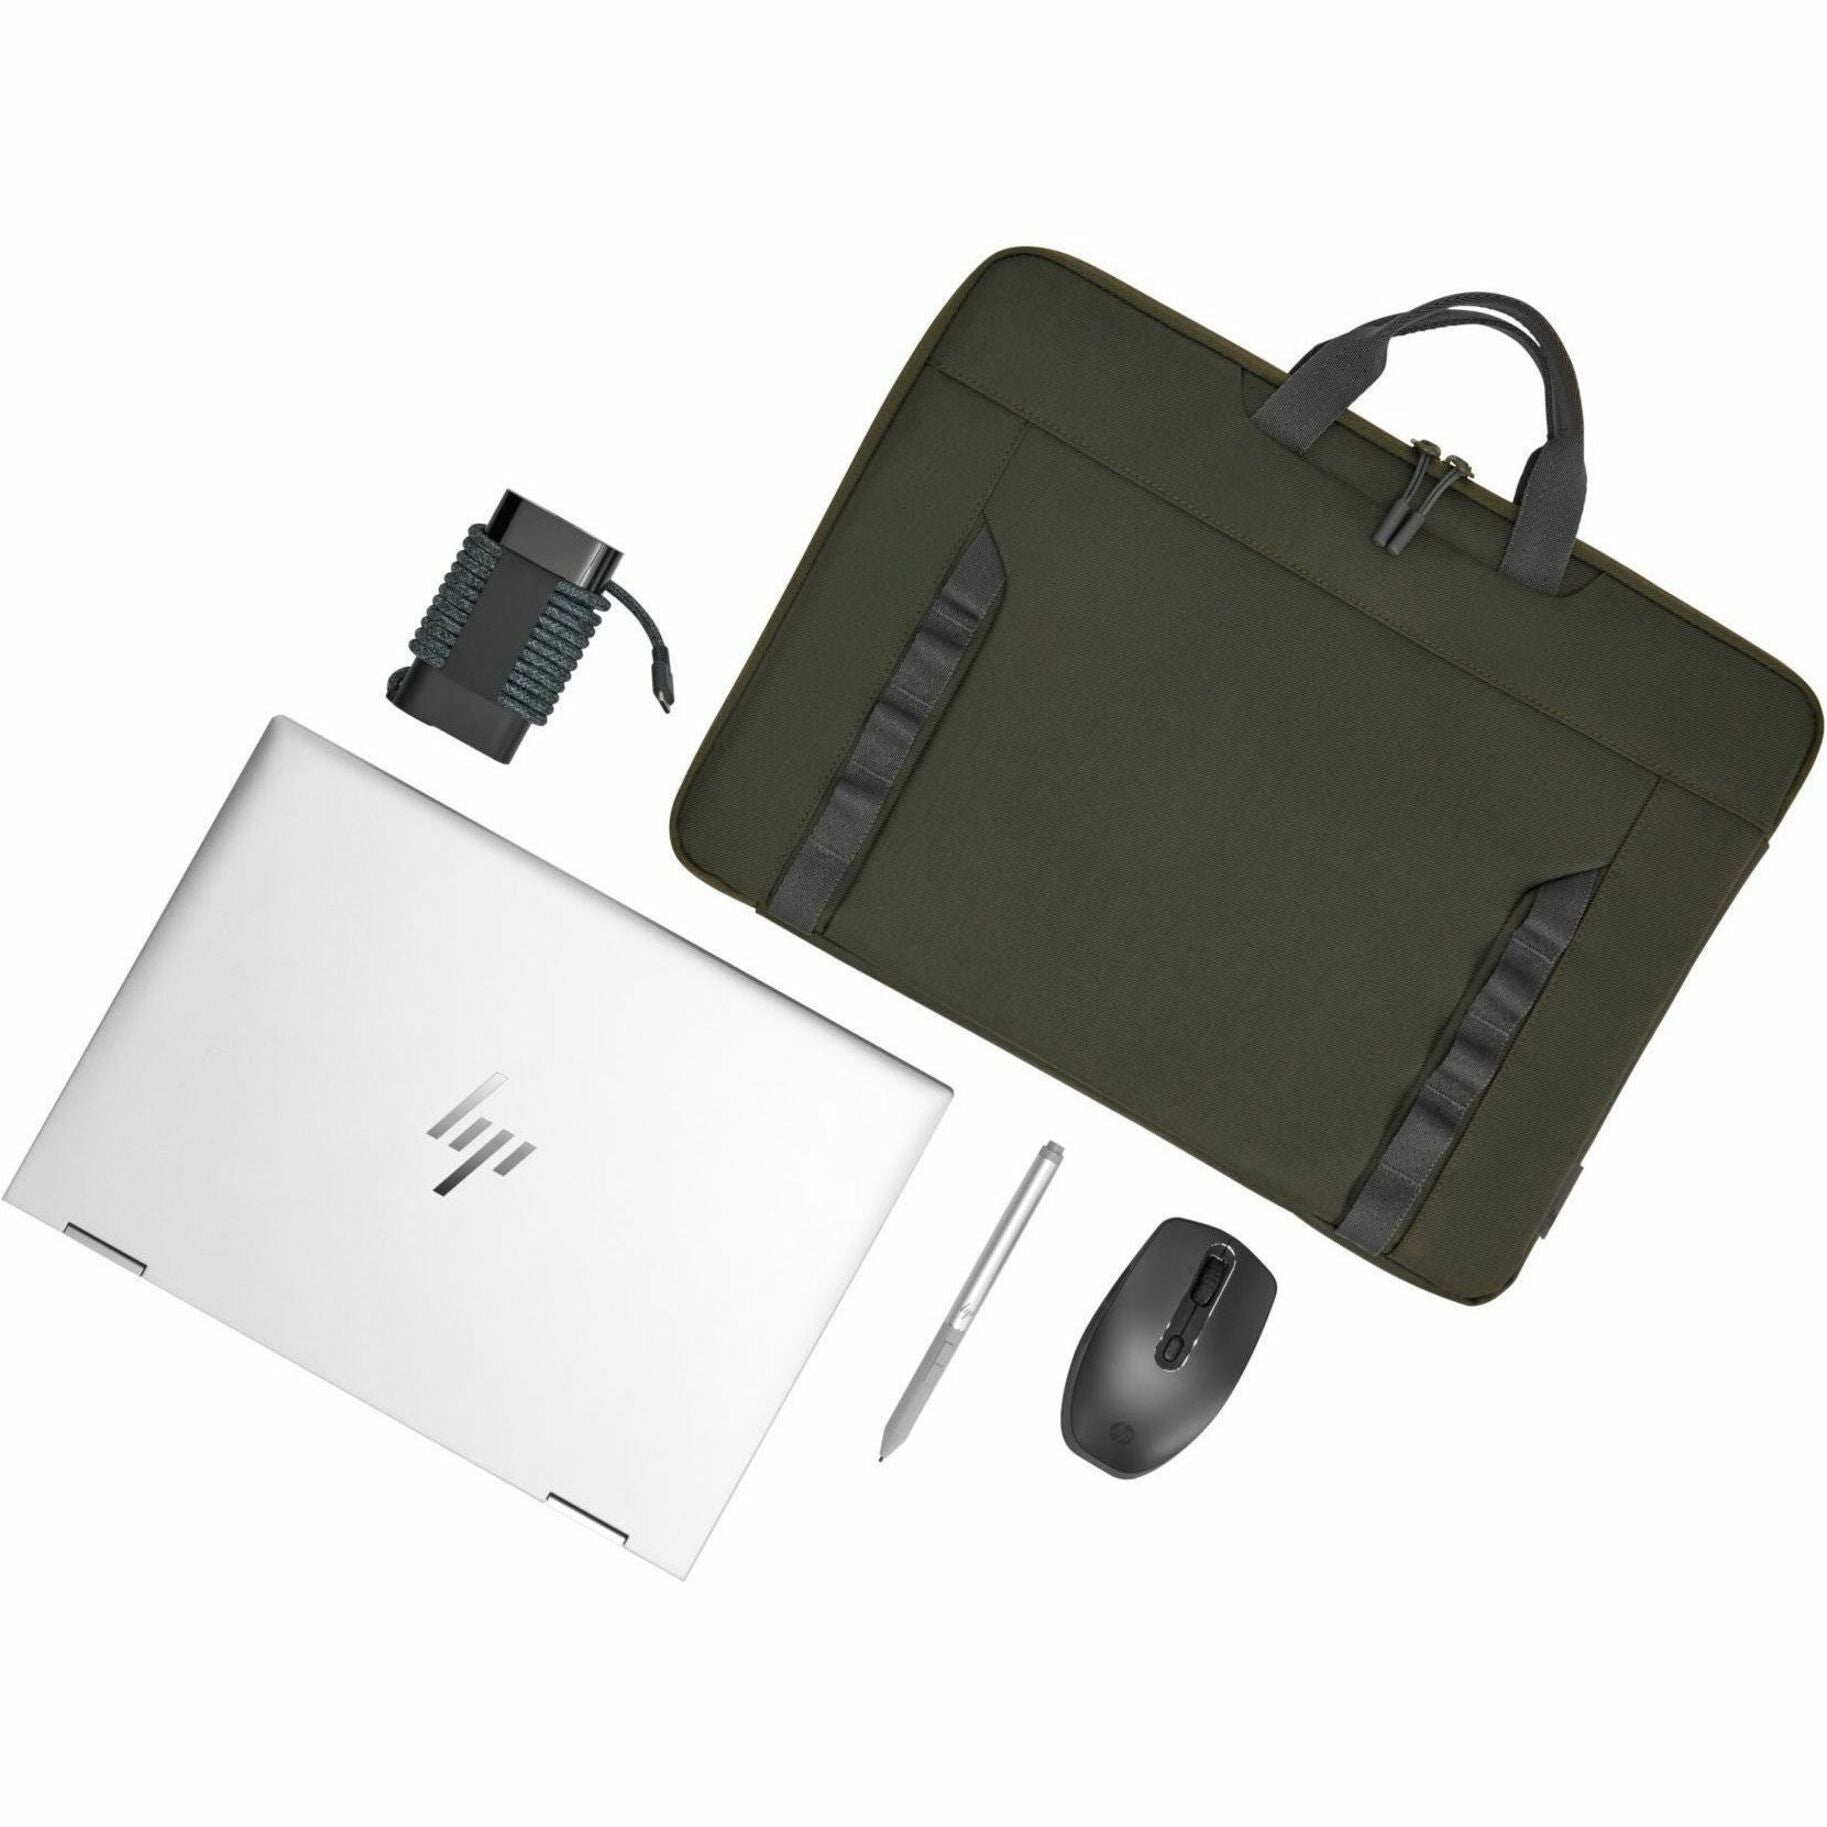 HP Carrying Case (Sleeve) for 15.6" Notebook - Gray, Green (9J498AA)